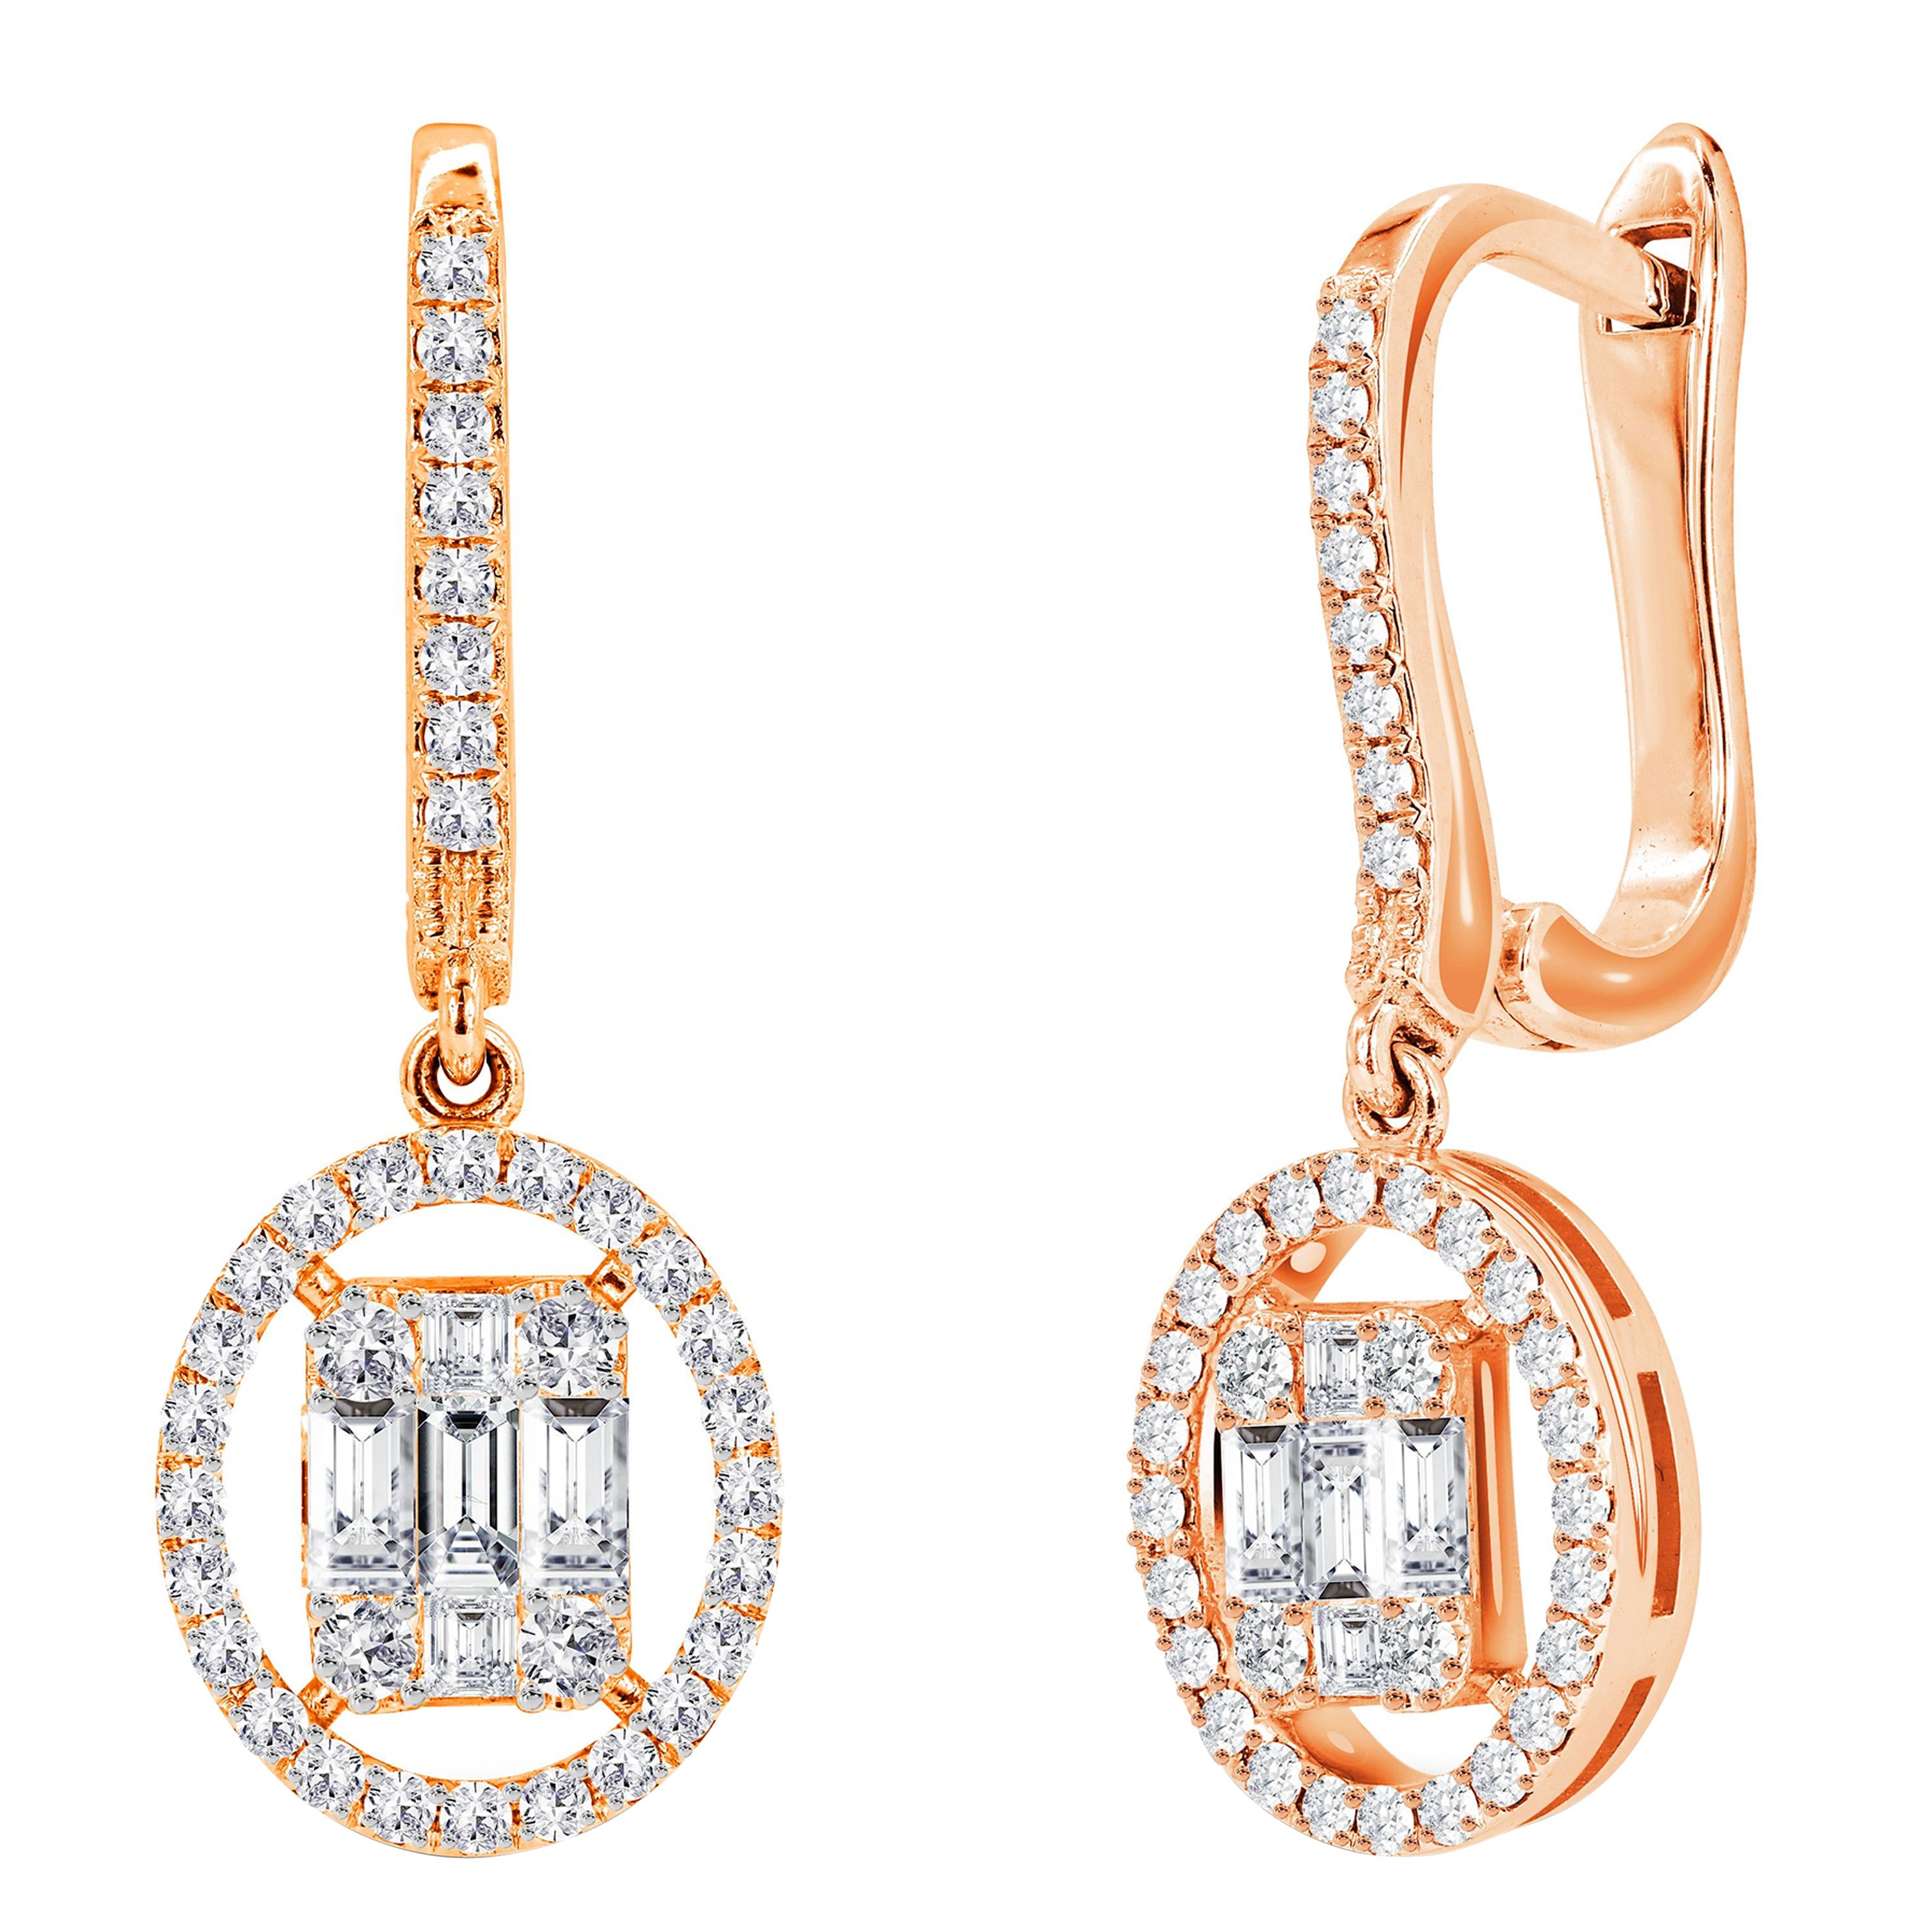 1.19ct Diamond Baguette and Round Cut Diamond Lever-Back Earrings in 14k Gold